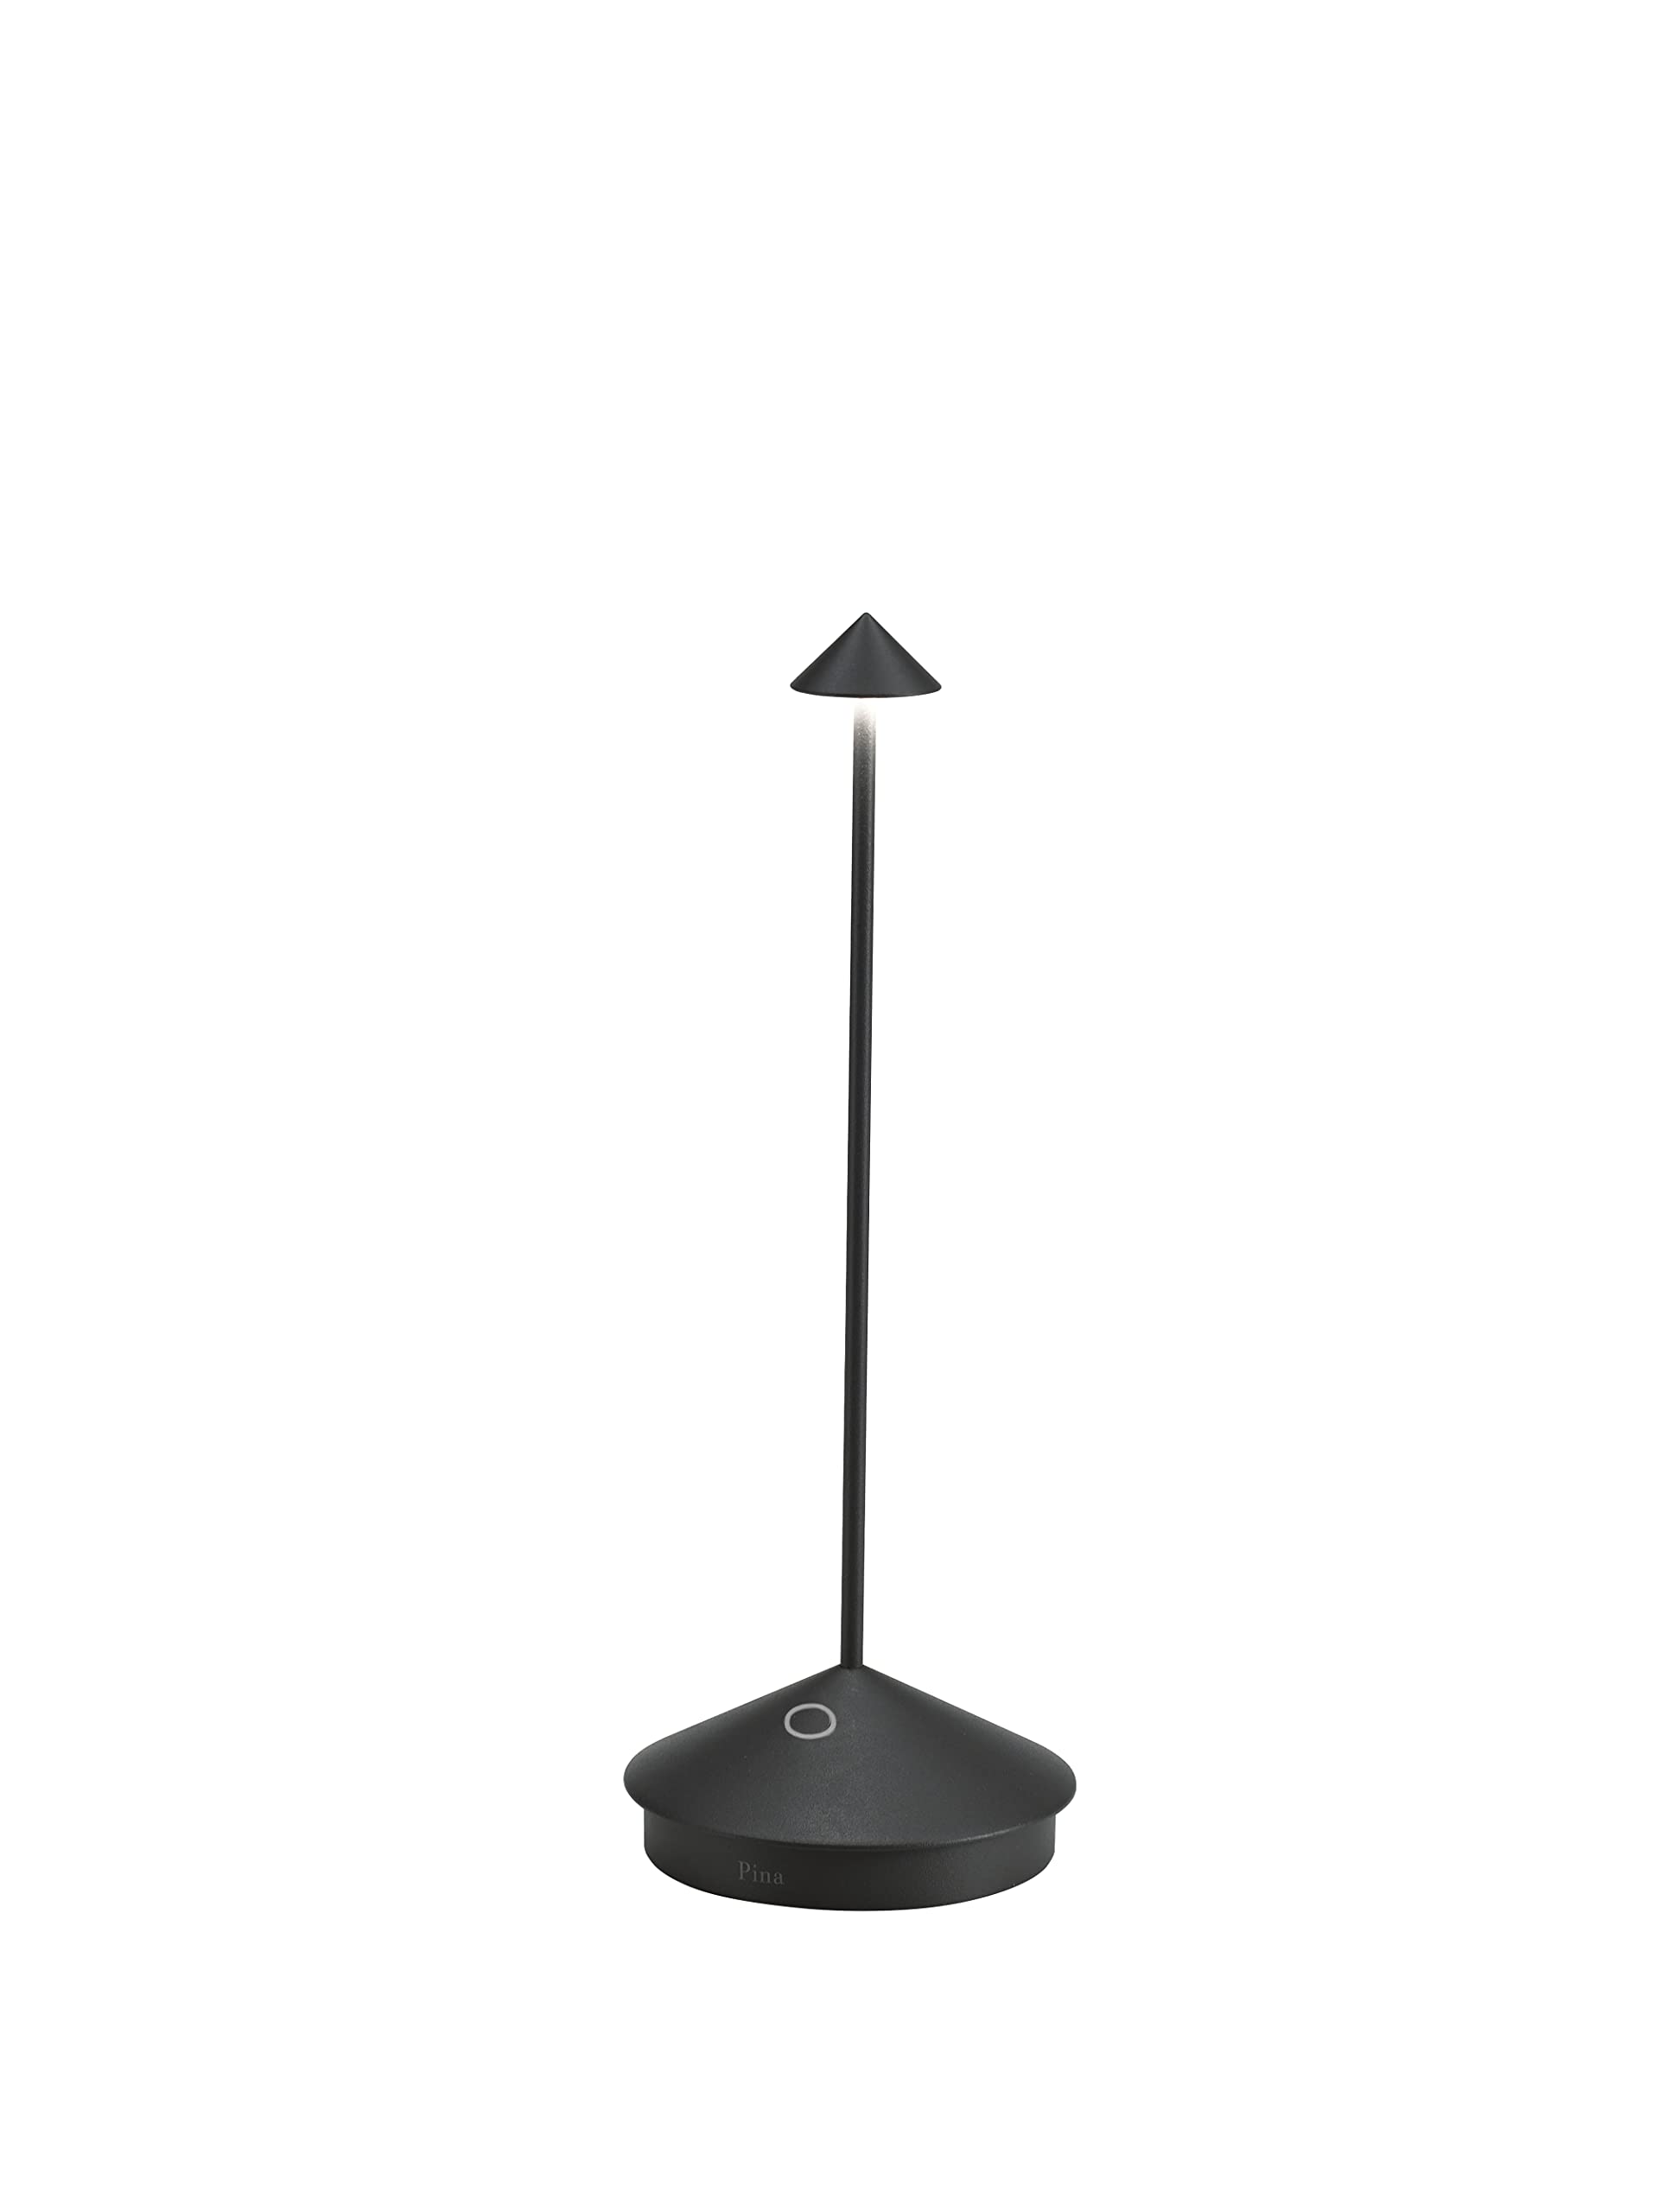 Zafferano Pina Pro LED Table Lamp (Color: Black) in Aluminum, IP54 Protection, Indoor/Outdoor use, Contact Charging Base, 11”, USA Plug